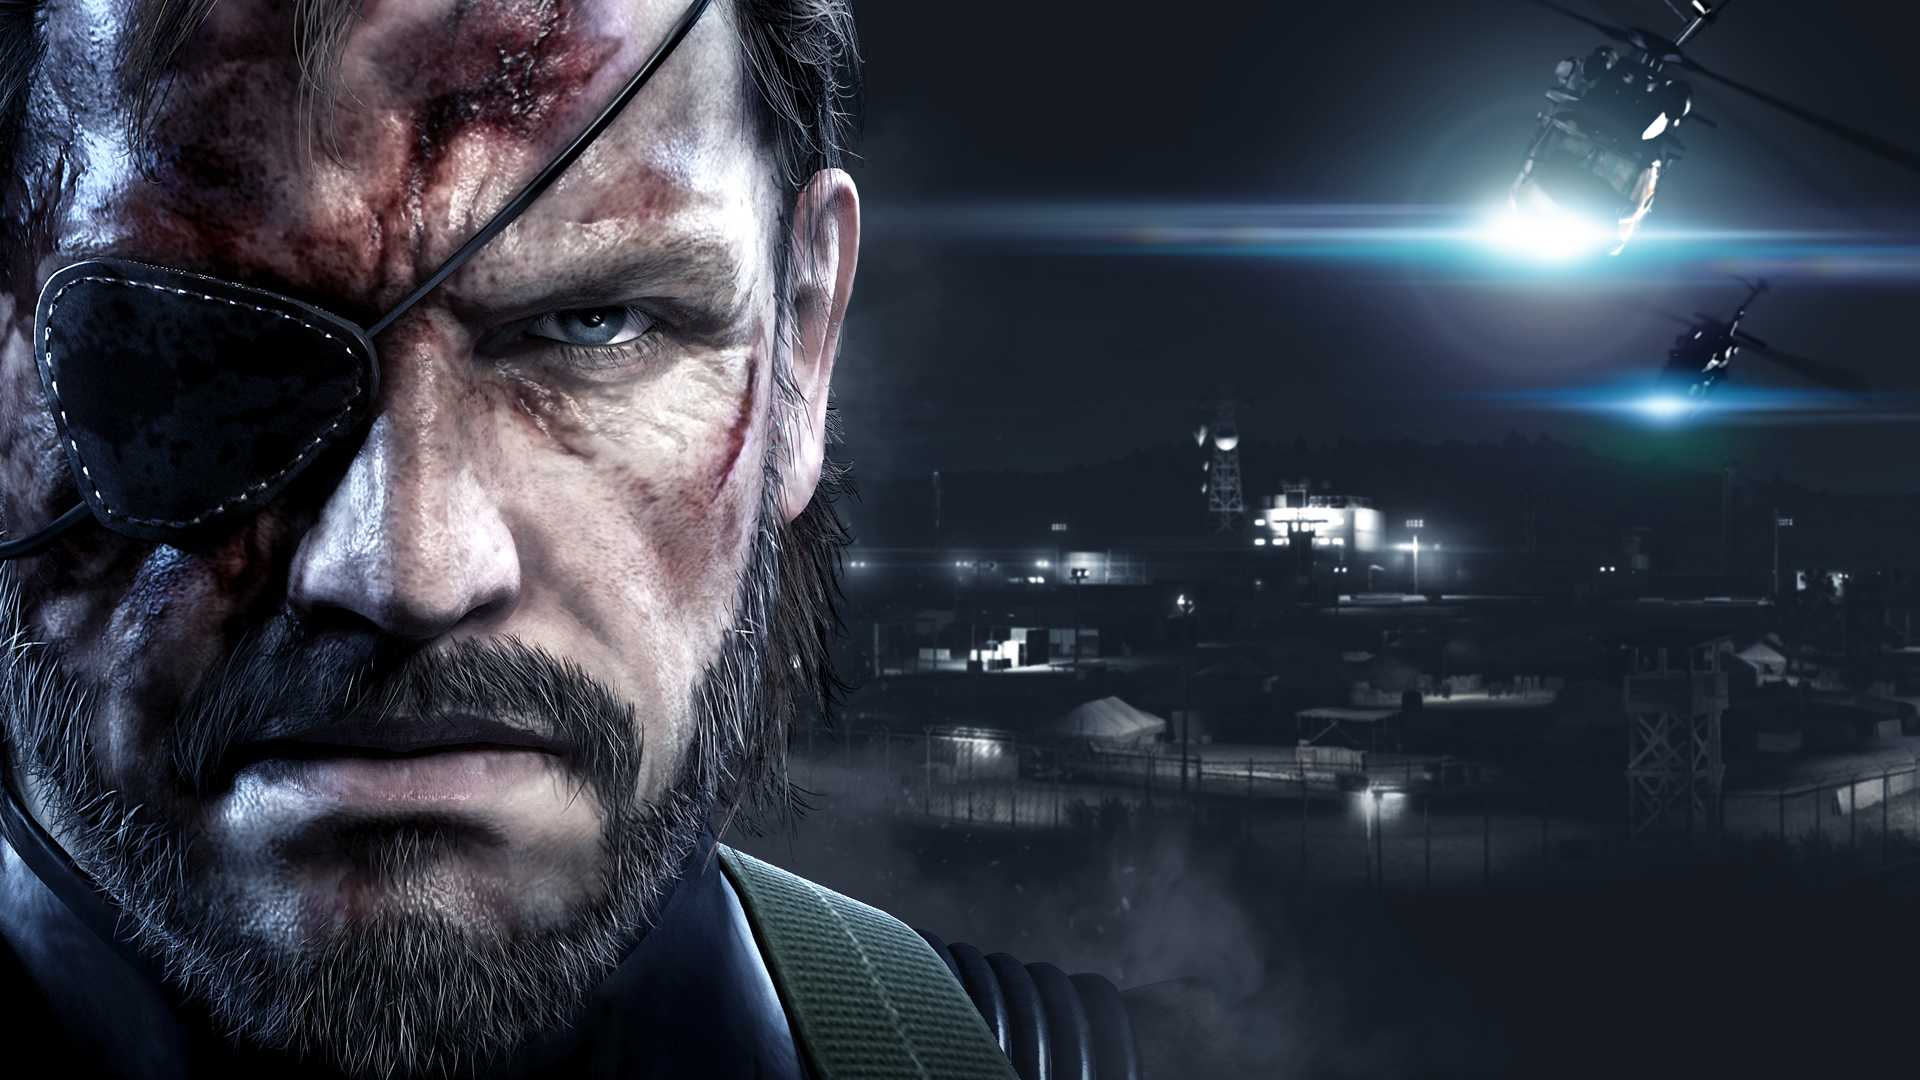 Игра solid v. Metal Gear Solid v: ground Zeroes. MGS 5 ground Zeroes. Metal Gear Solid 4: ground Zeroes. Metal Gear Solid 5 ground Zeroes Wallpaper.